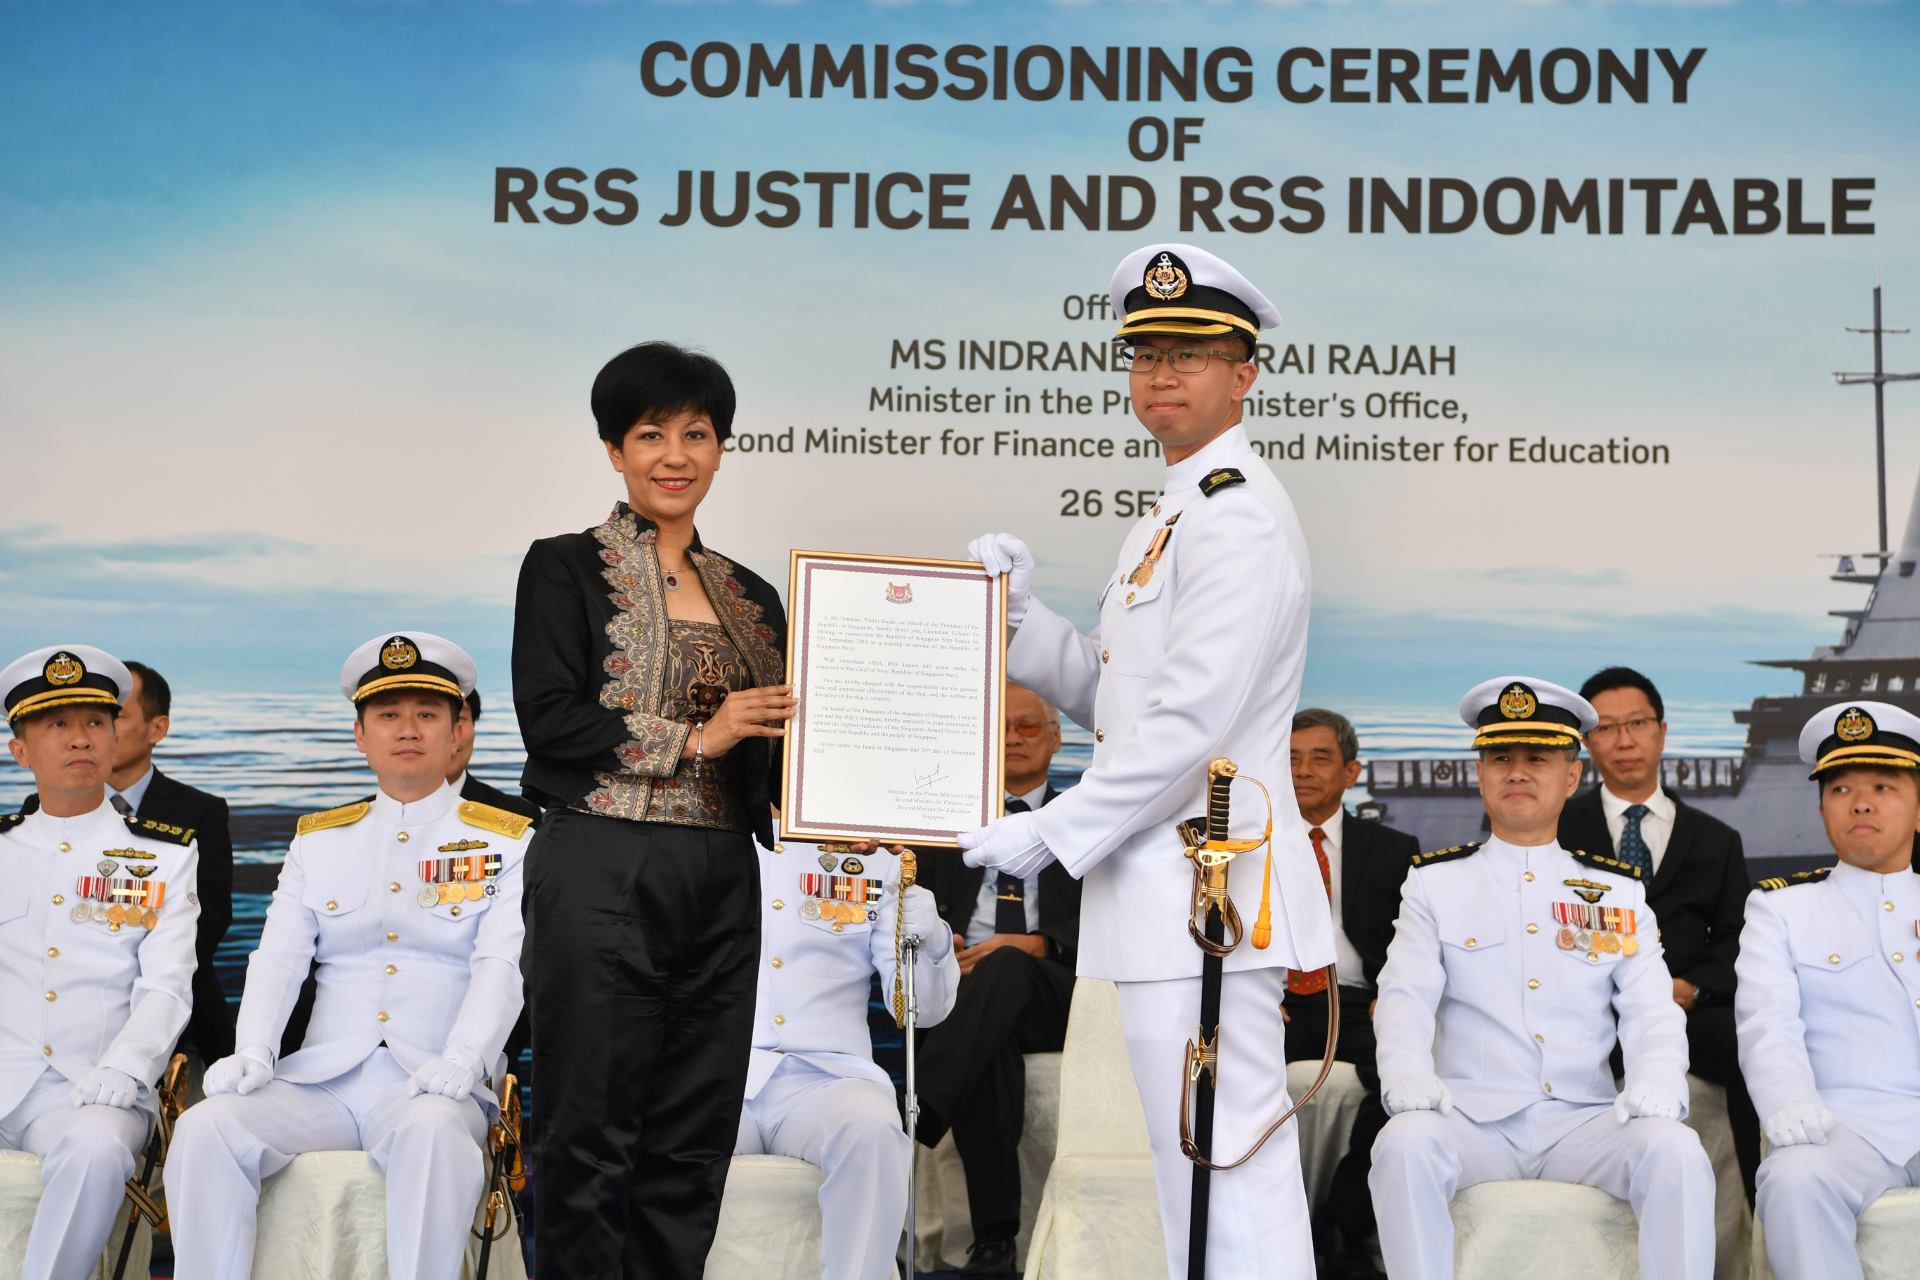 Ms Rajah presenting the Commissioning Warrant to the Commanding Officer of RSS Justice LTC Ye Yiming.